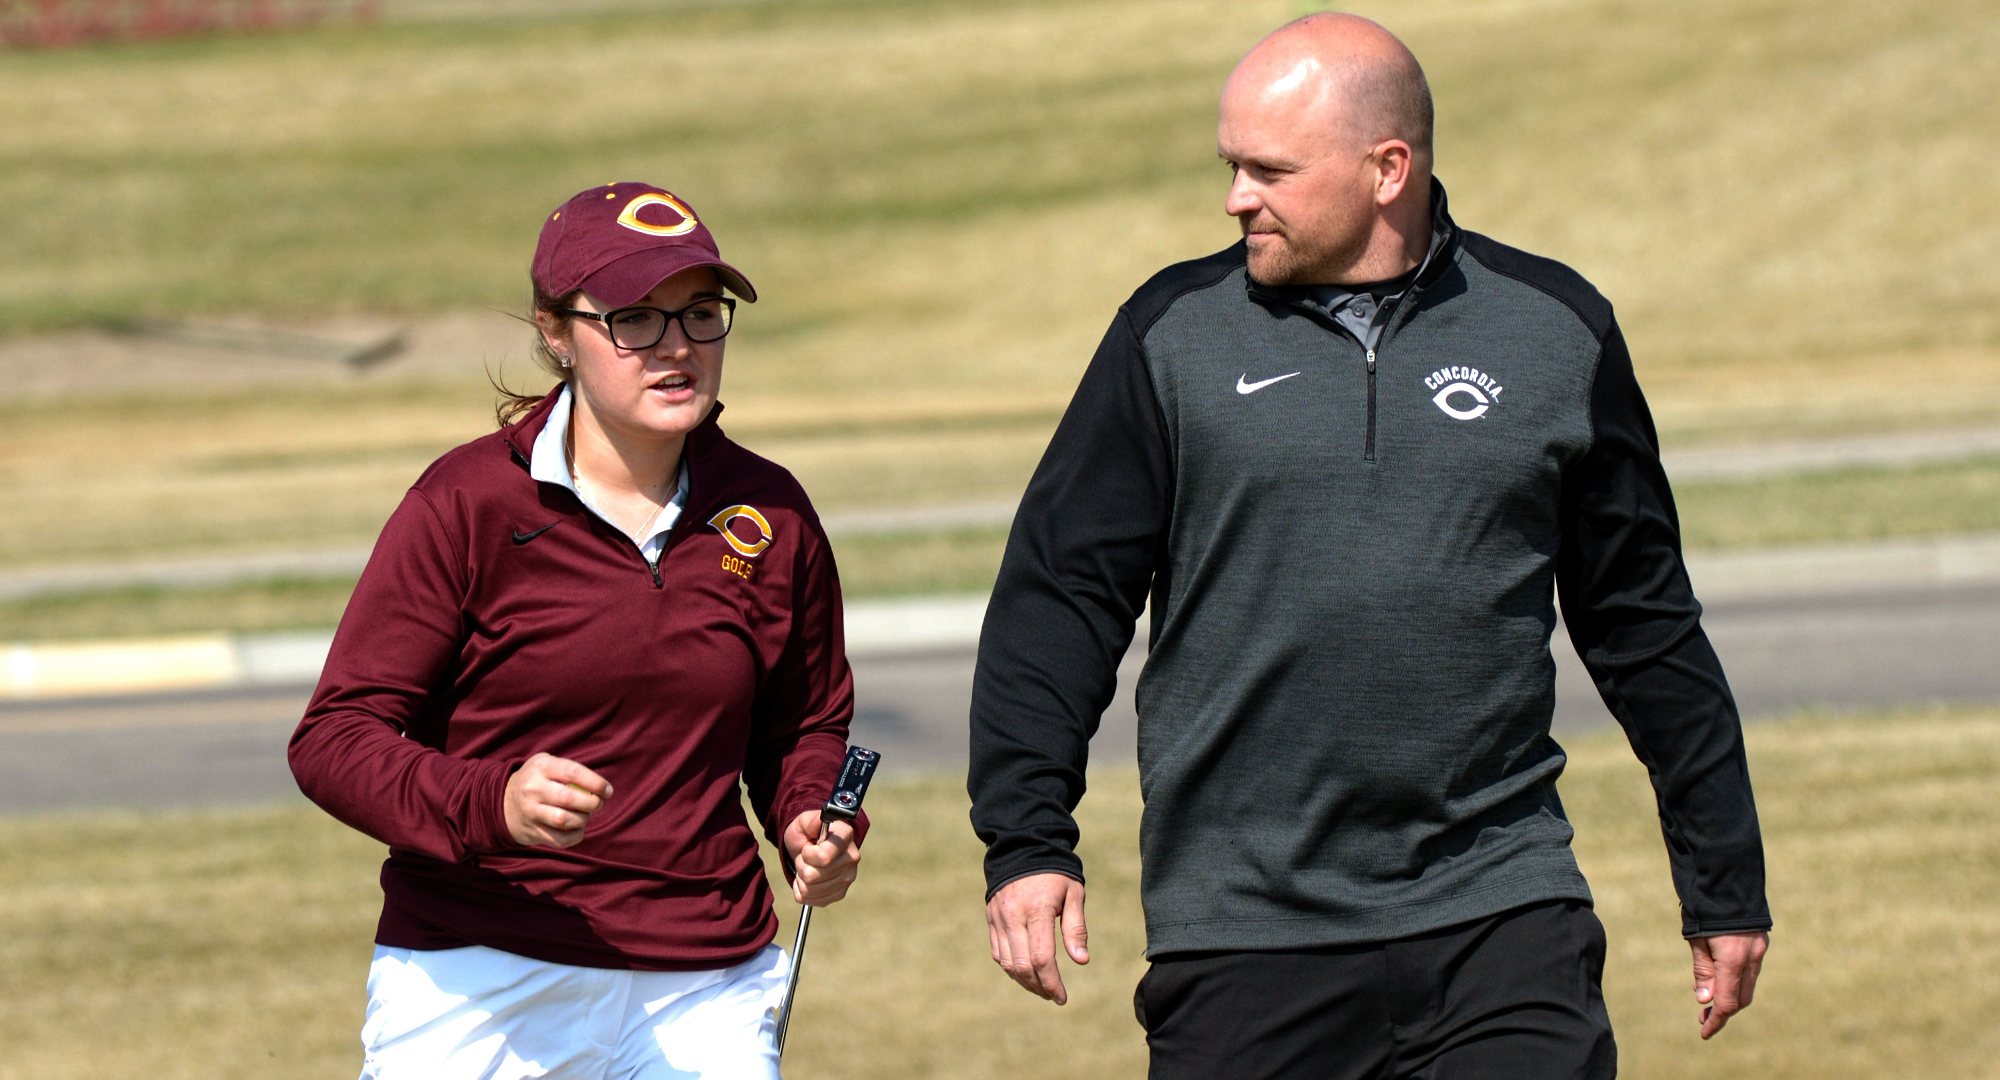 Freshman Katie Krueger talks with head coach Joe Christianson during the first round of the Cobber Open. Krueger placed fifth to earn the first Top 20 finish of her career.